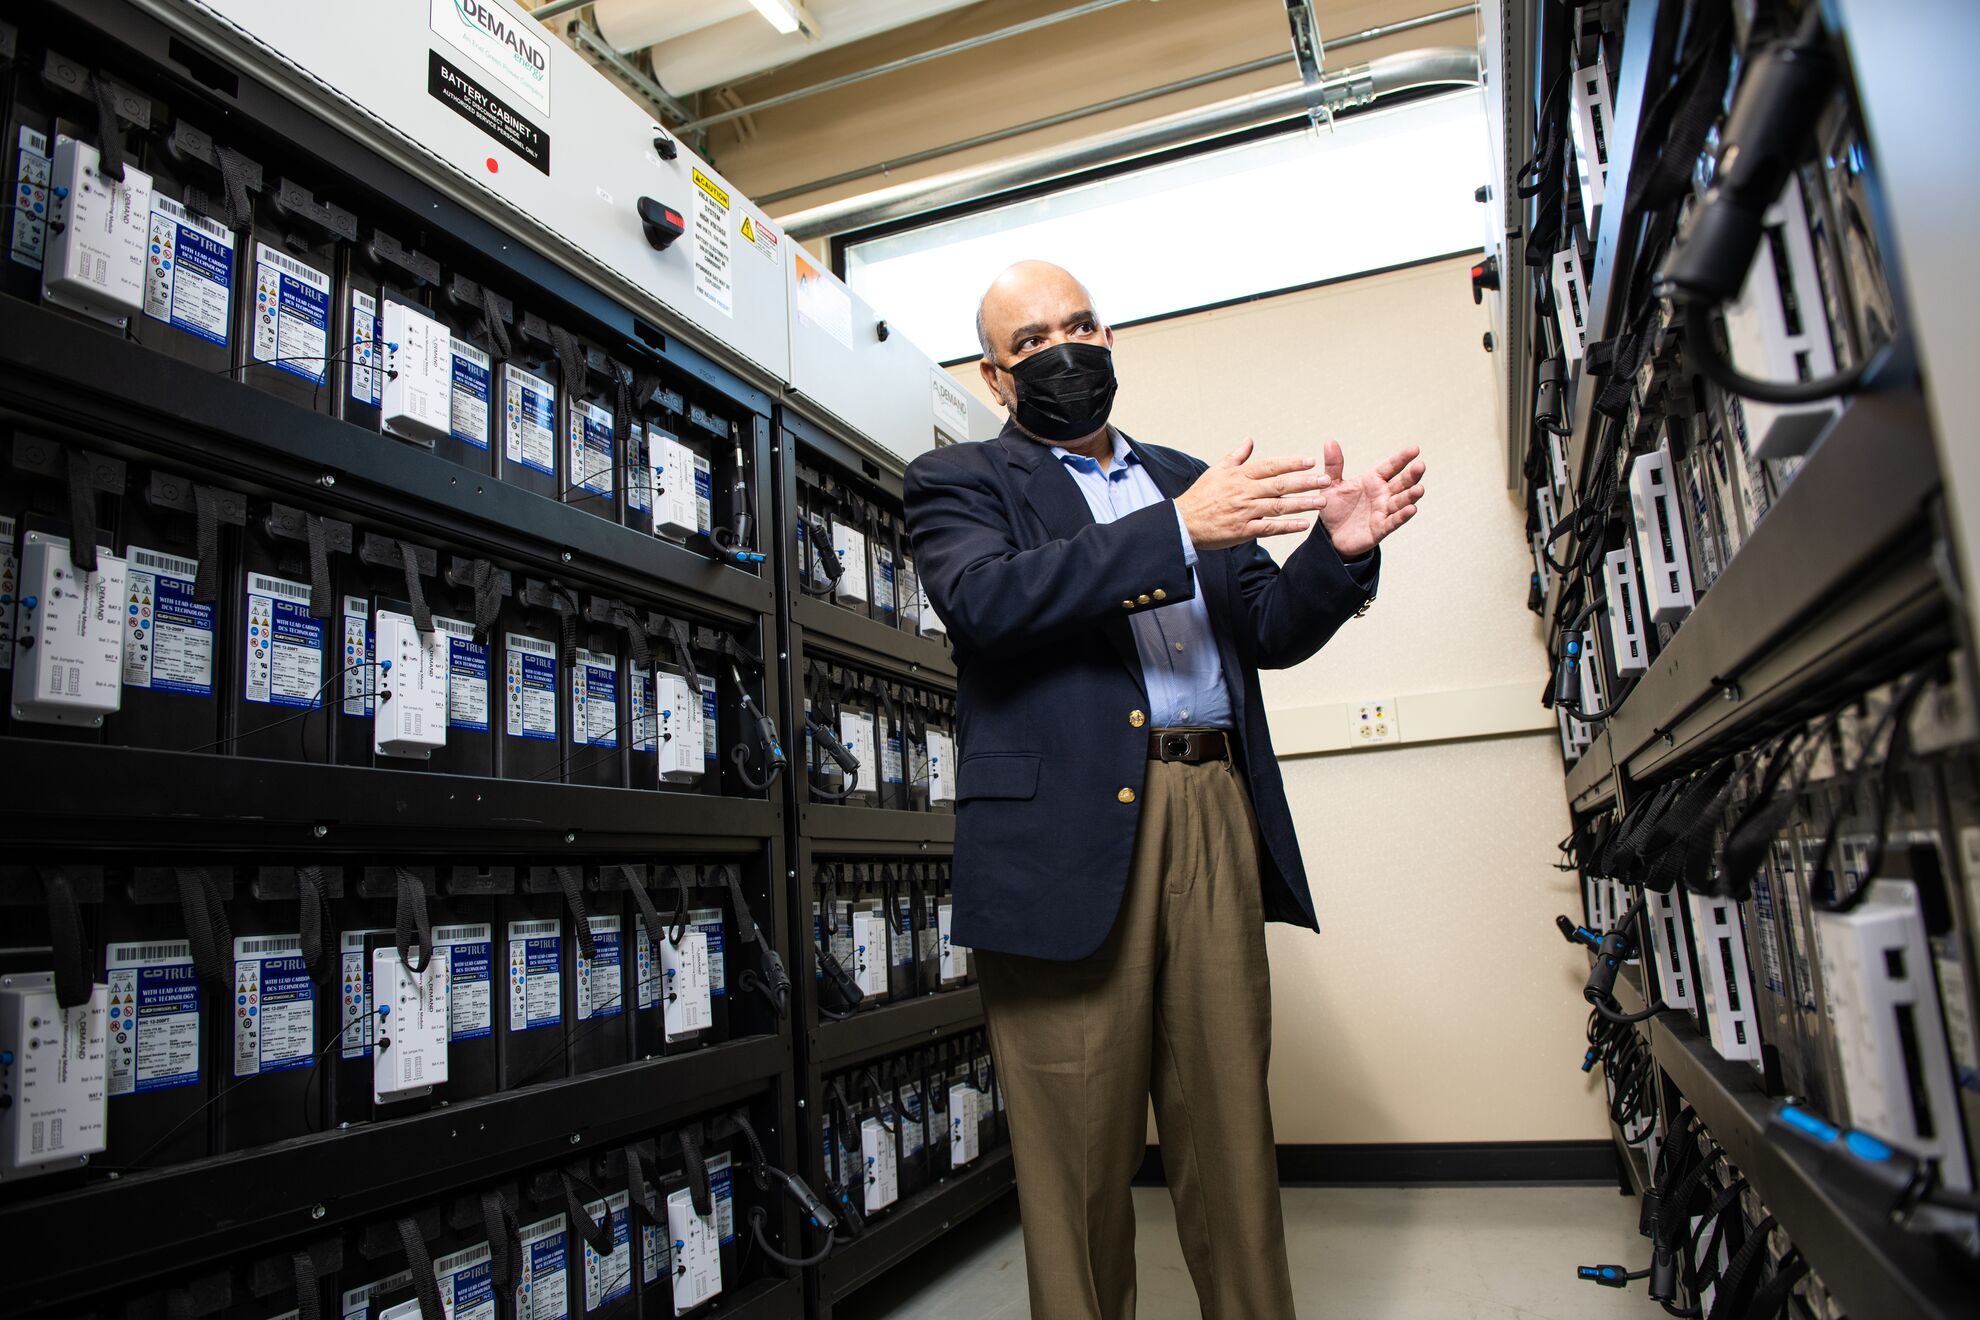 Photo shows an energy storage system inside of the Systems Engineering Building at PNNL